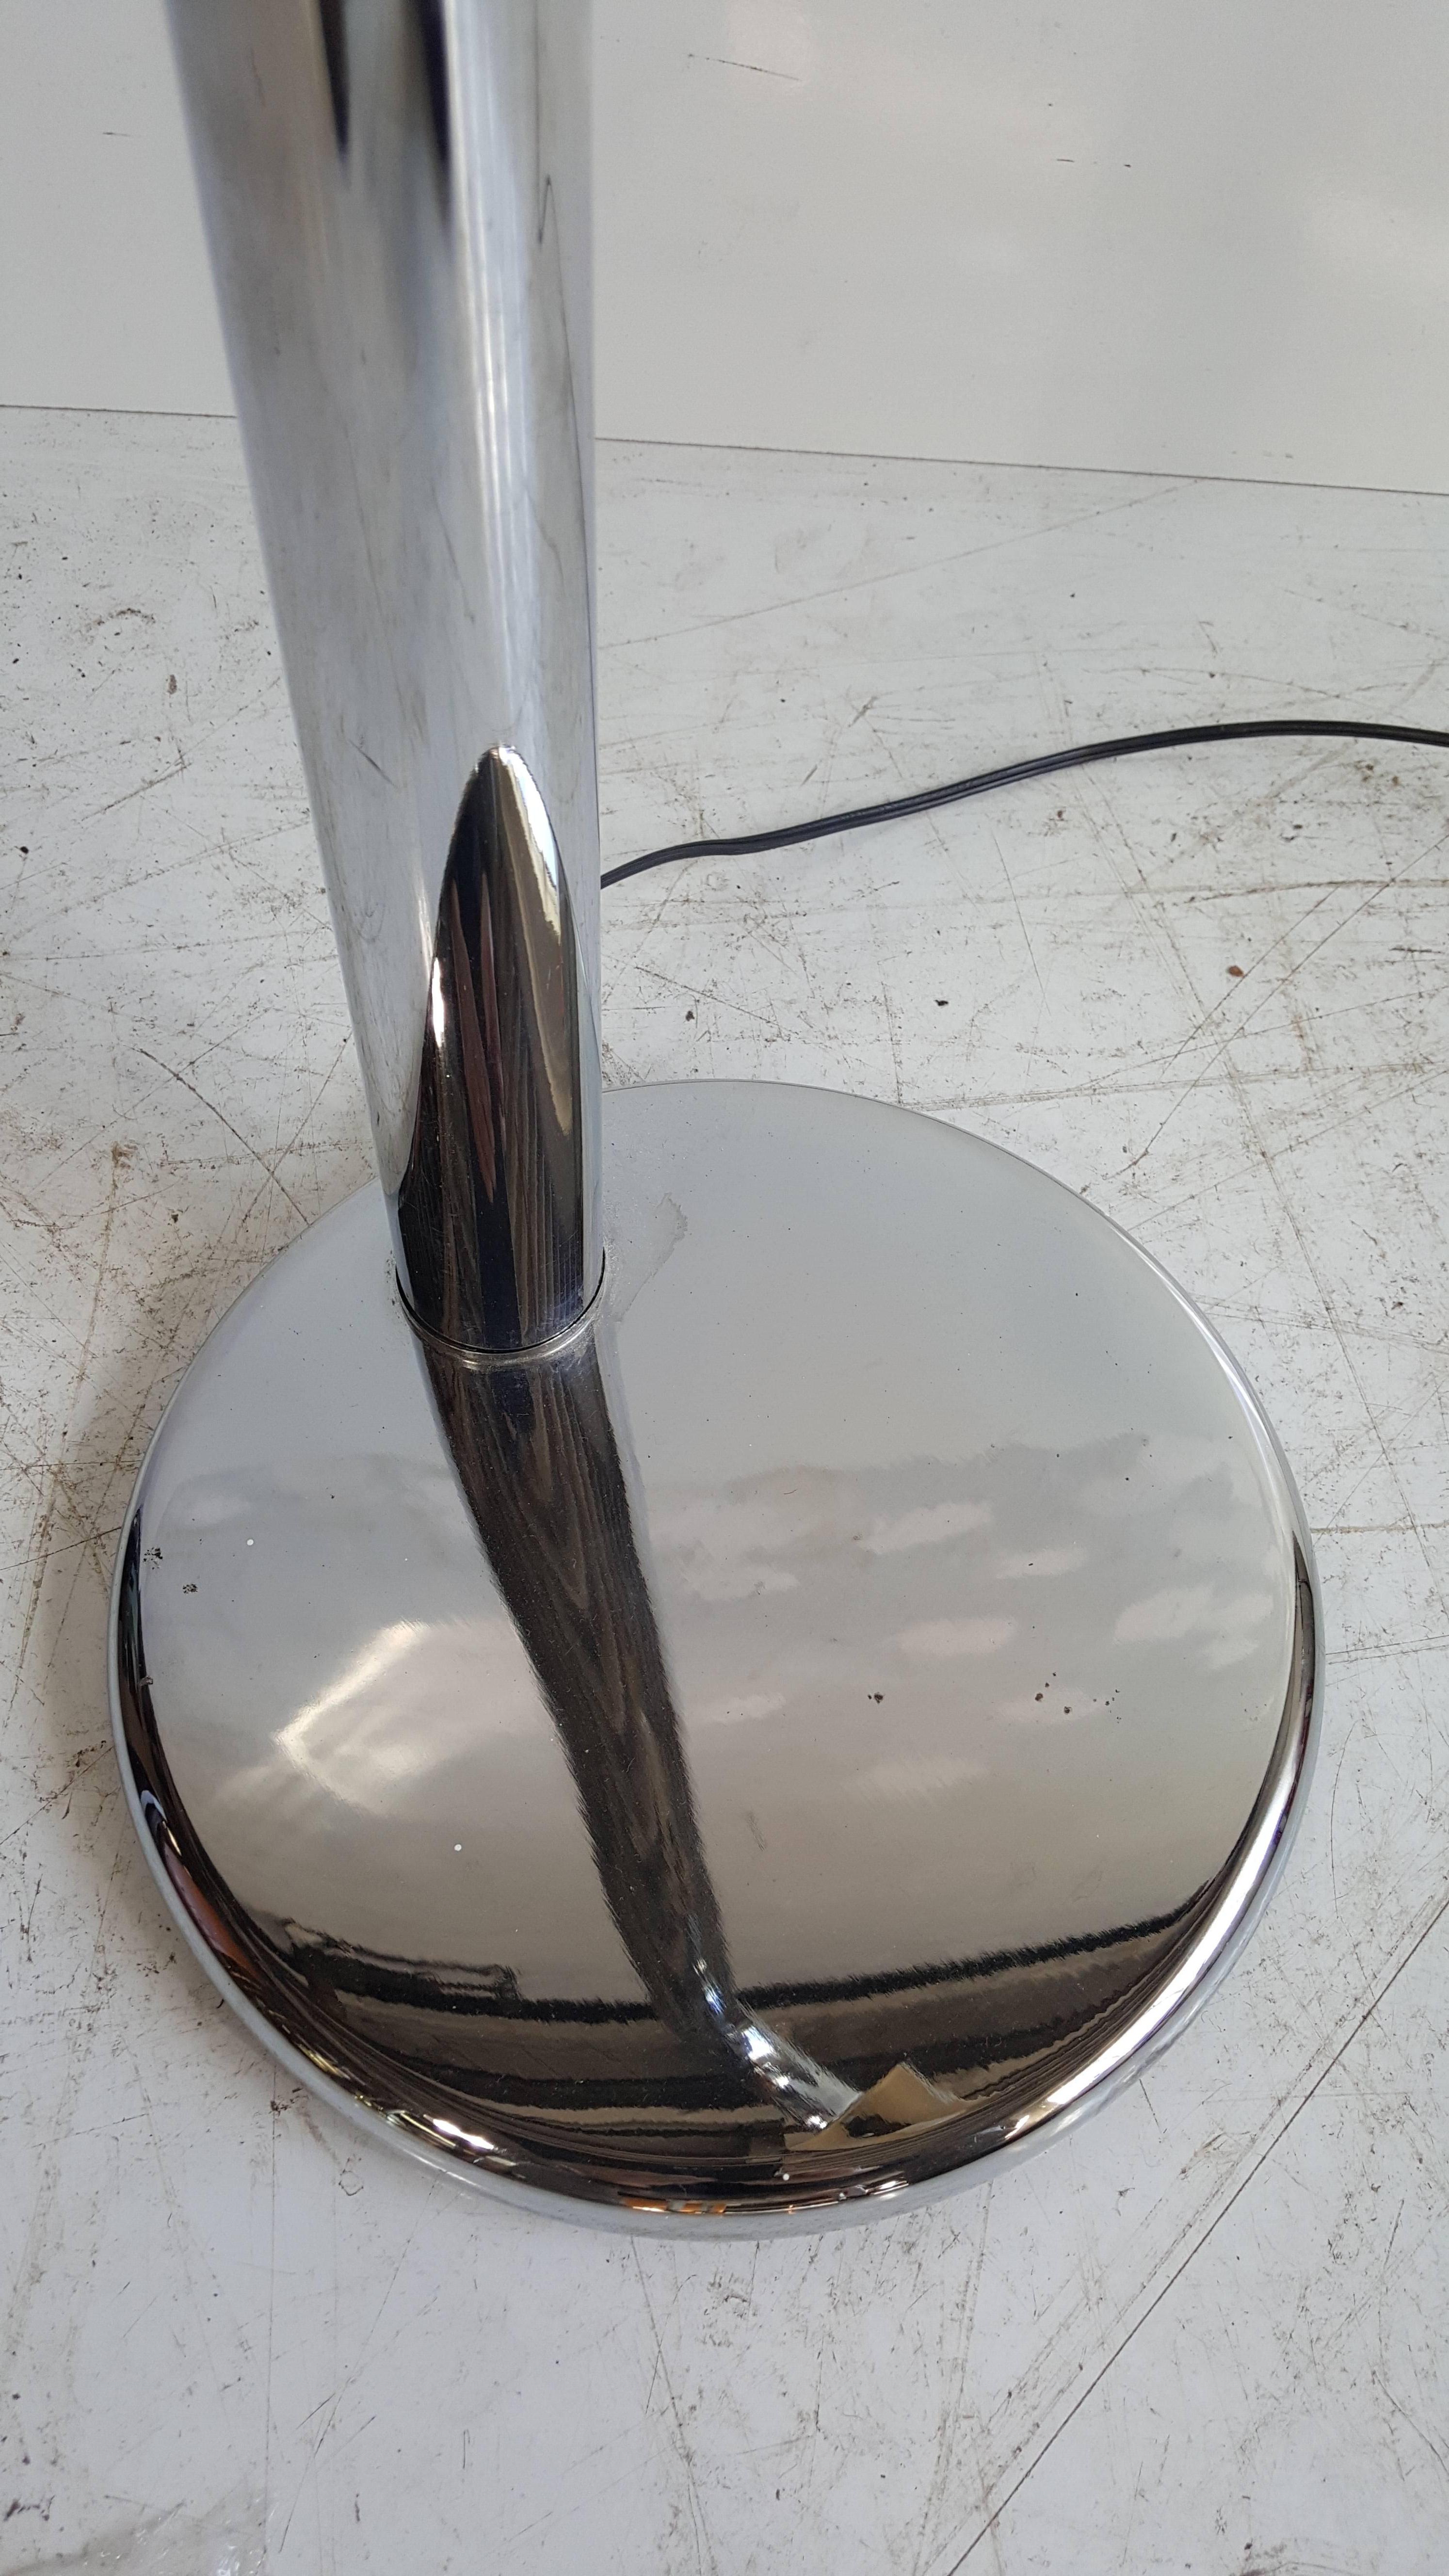 Modernist Chromed Steel Floor Lamp by Jim Bindman for Rainbow Lamp Co In Good Condition For Sale In Buffalo, NY